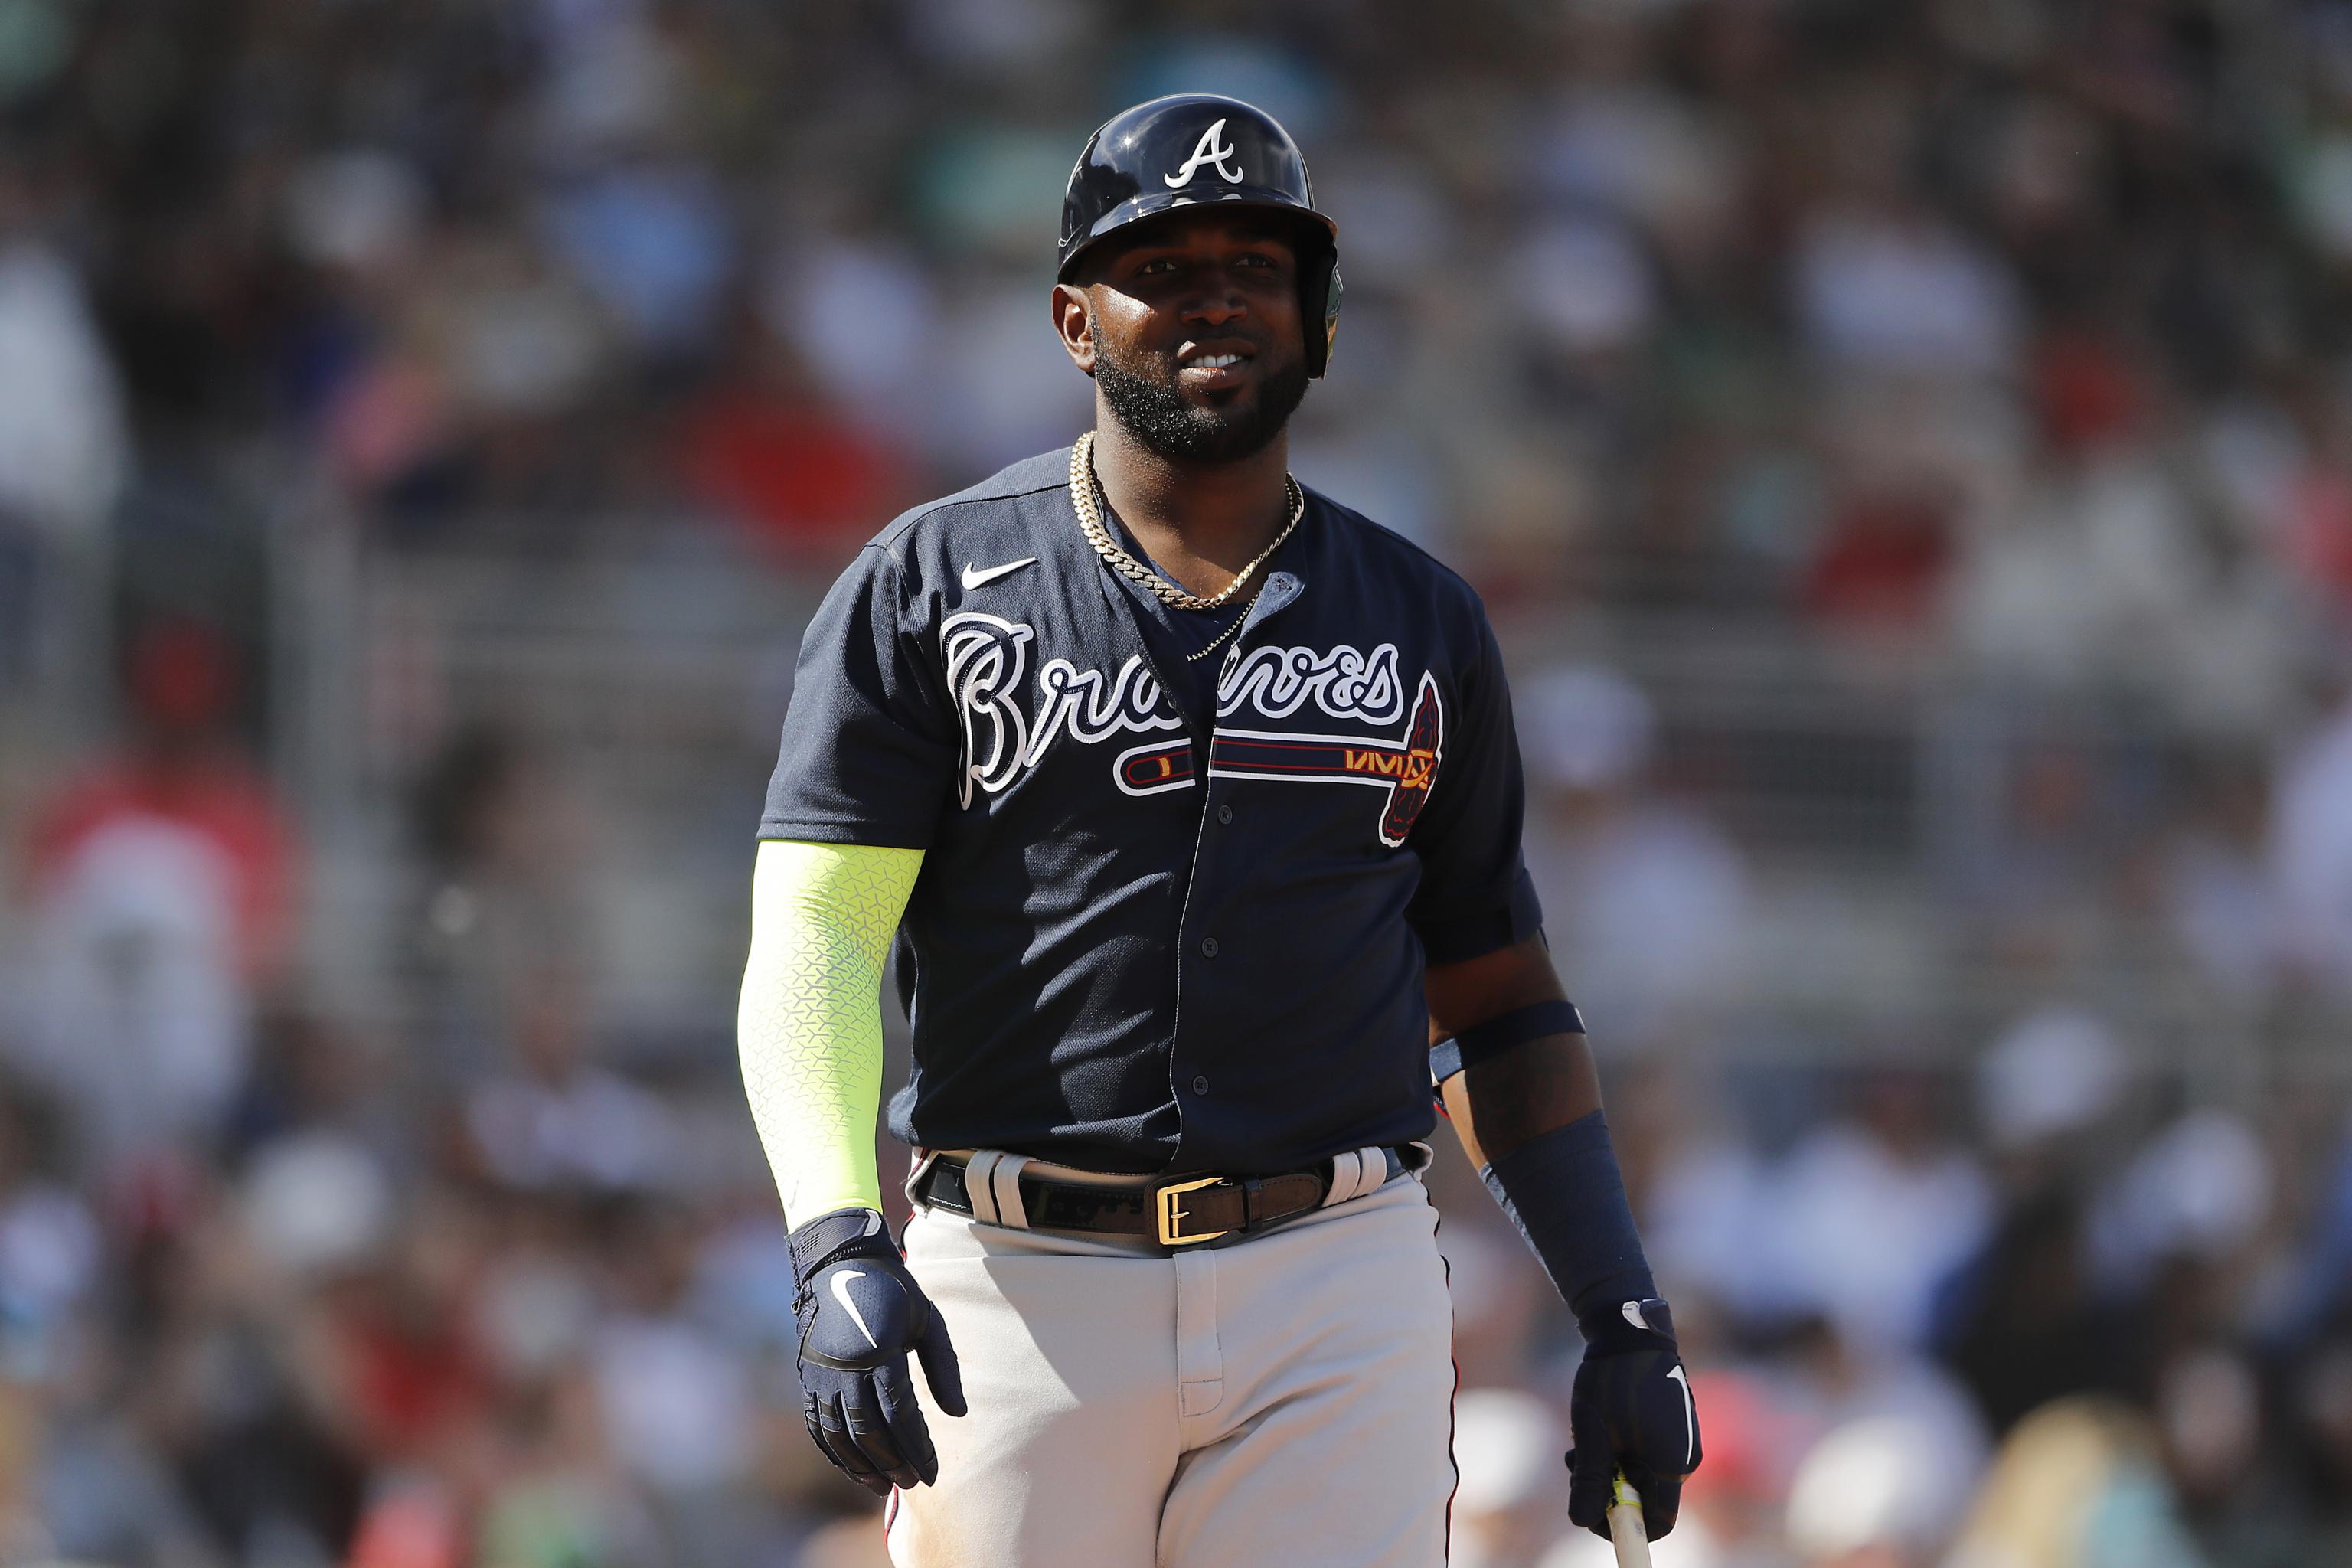 Braves' Marcell Ozuna's Wife Genesis Arrested on Domestic Battery Charge